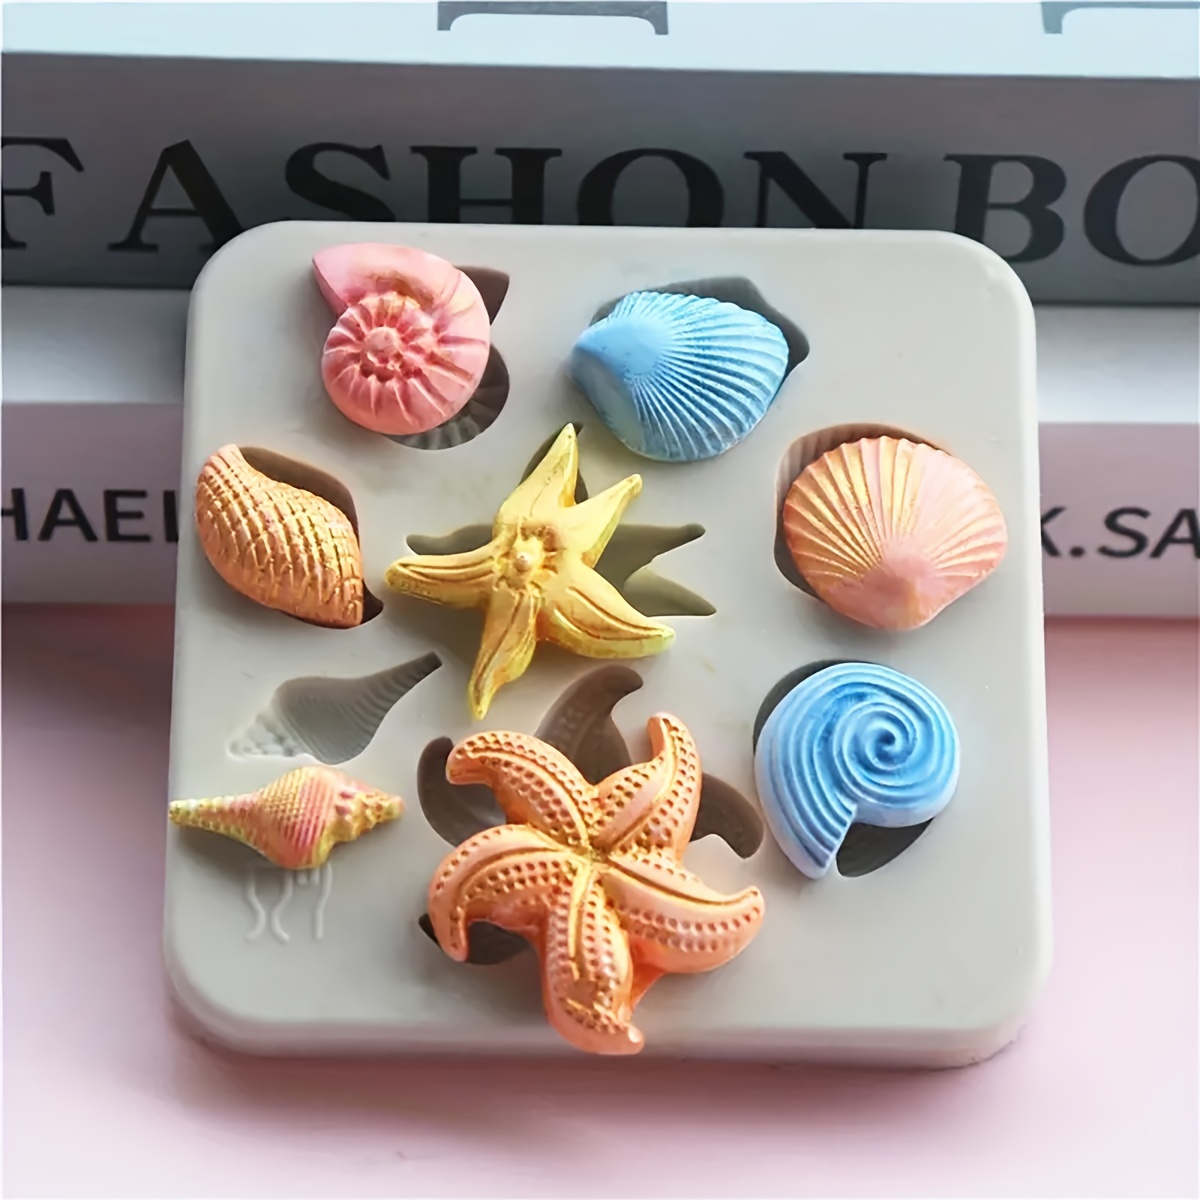 

Diy Marine Life Silicone Mold, 3d Conch Shell Starfish Silicone Mold, Marine Life Ornaments And Craft Decorations Mold.